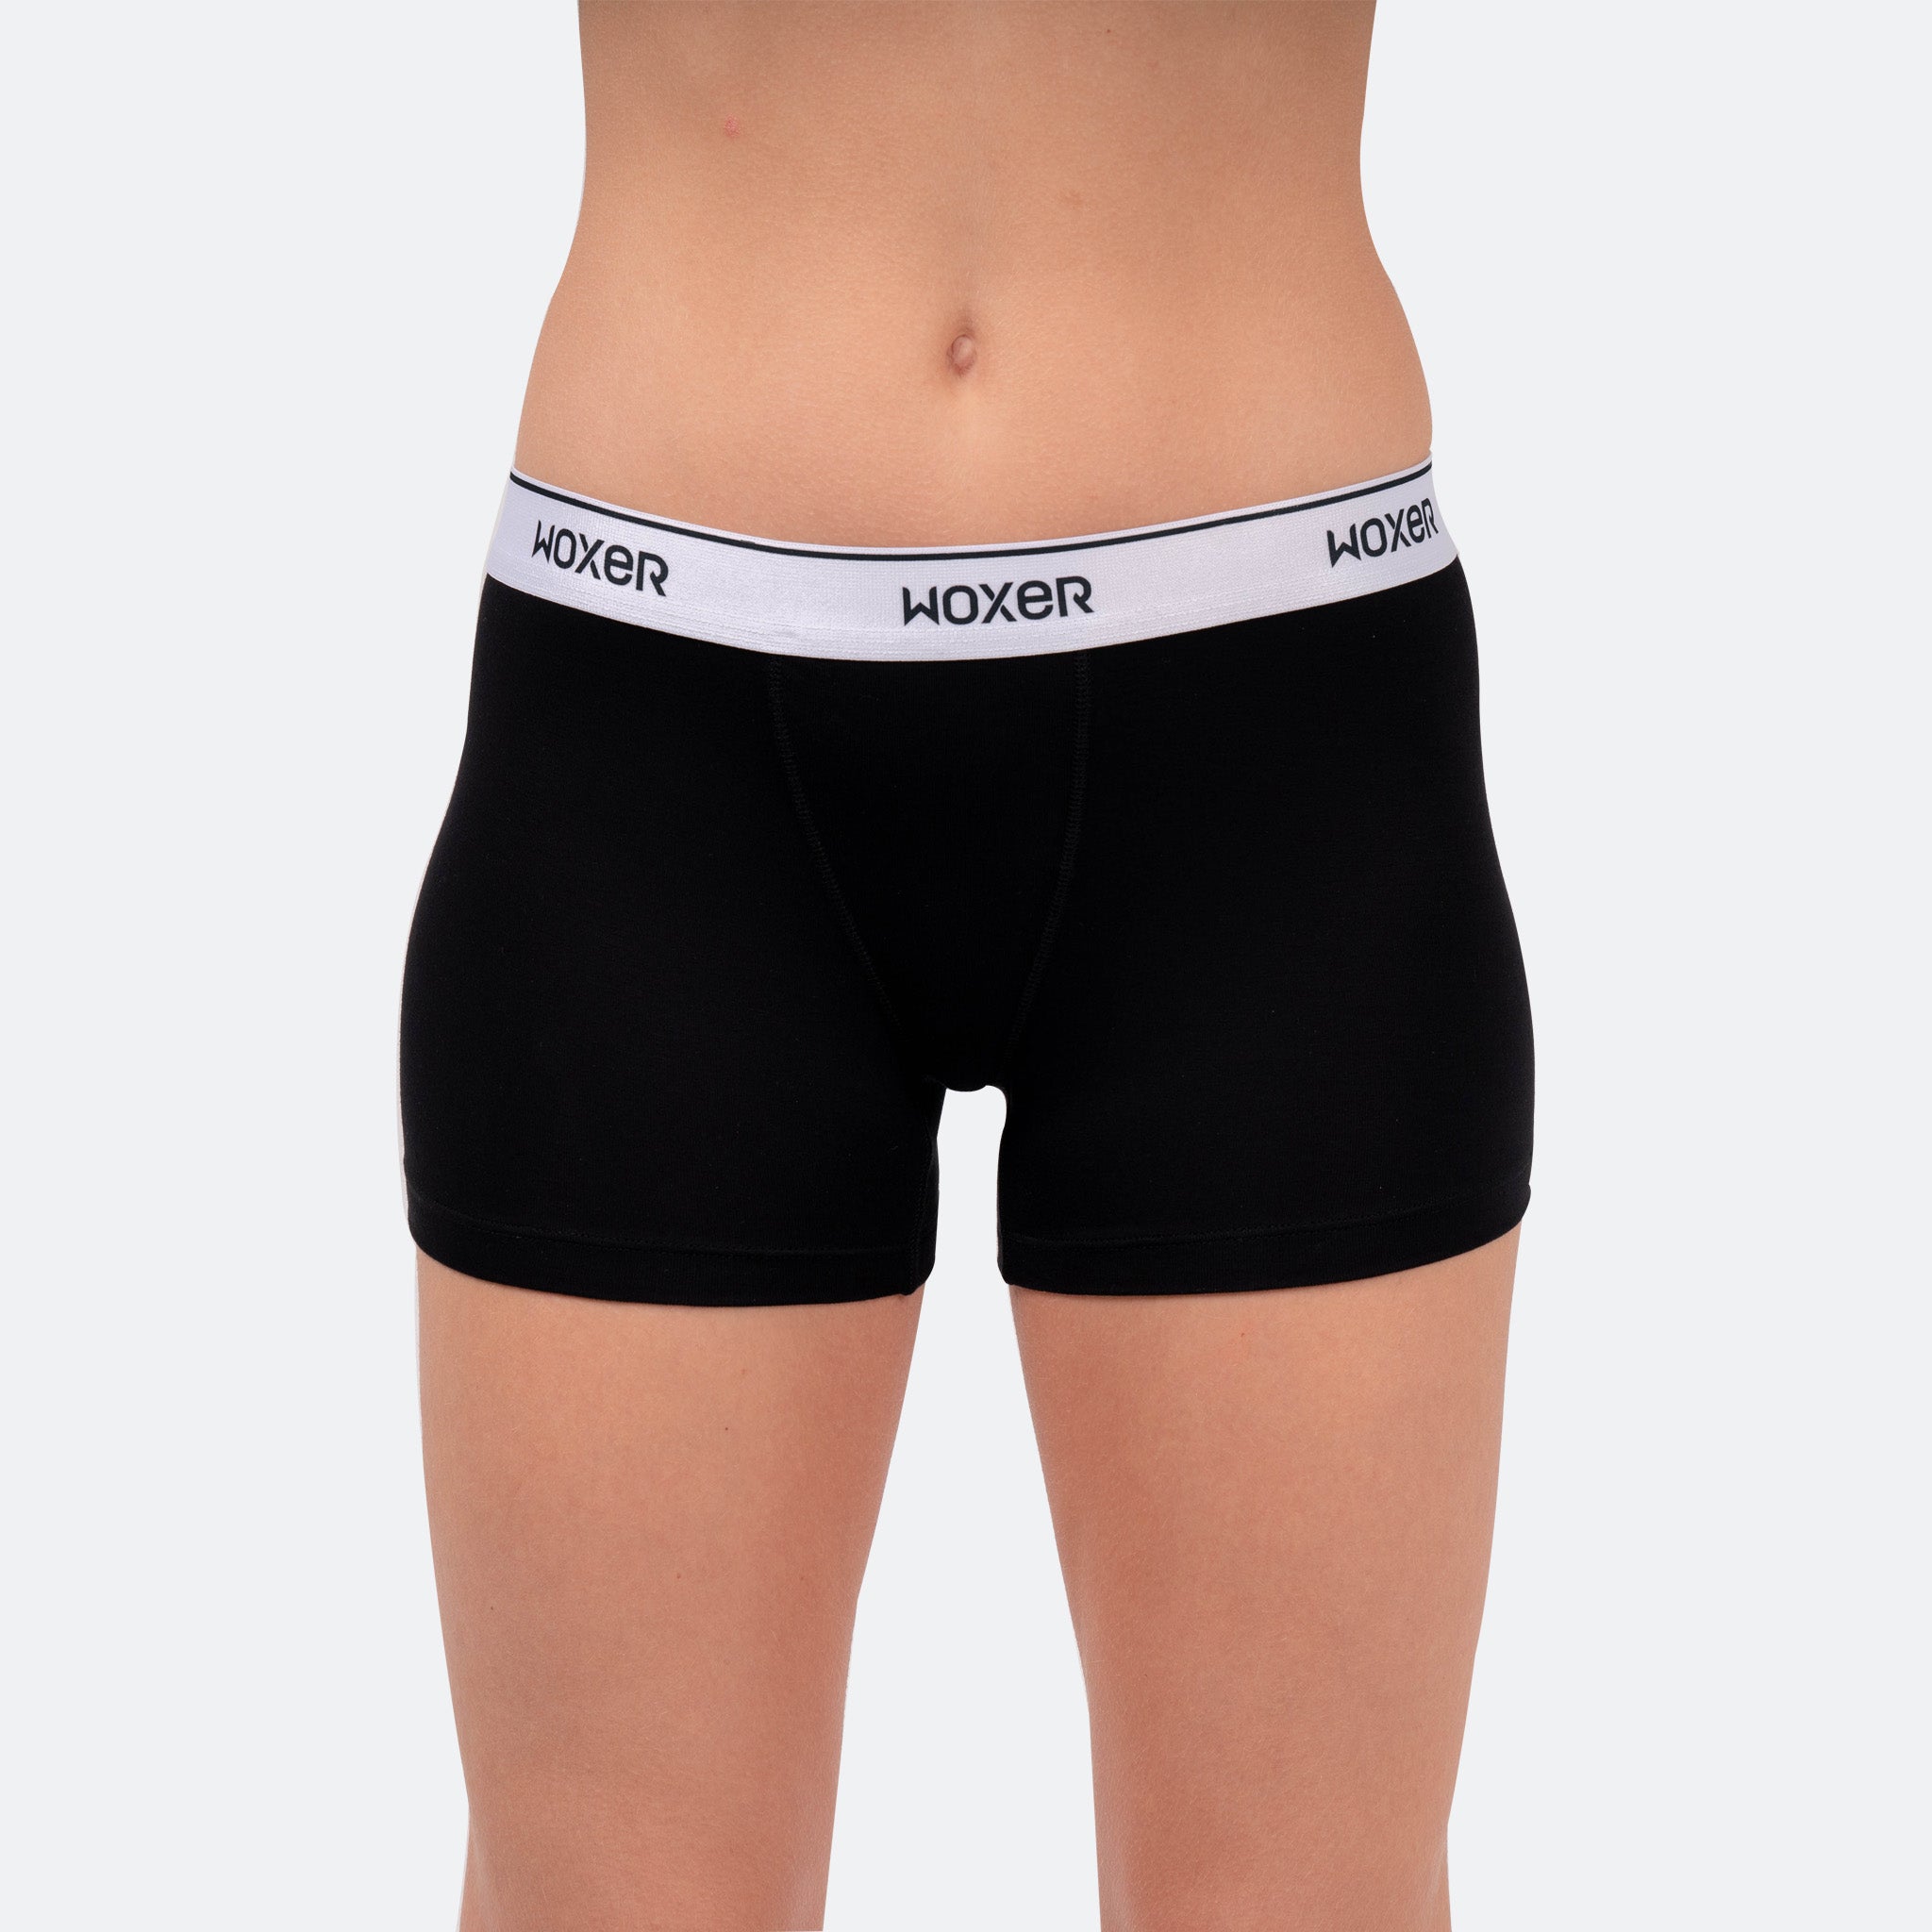 Buy Woxer Womens Boxer Briefs Underwear, Star 3” Boyshorts Panties Soft  Anti-Chafing, No Roll Inseam, Black 2.0, Large at